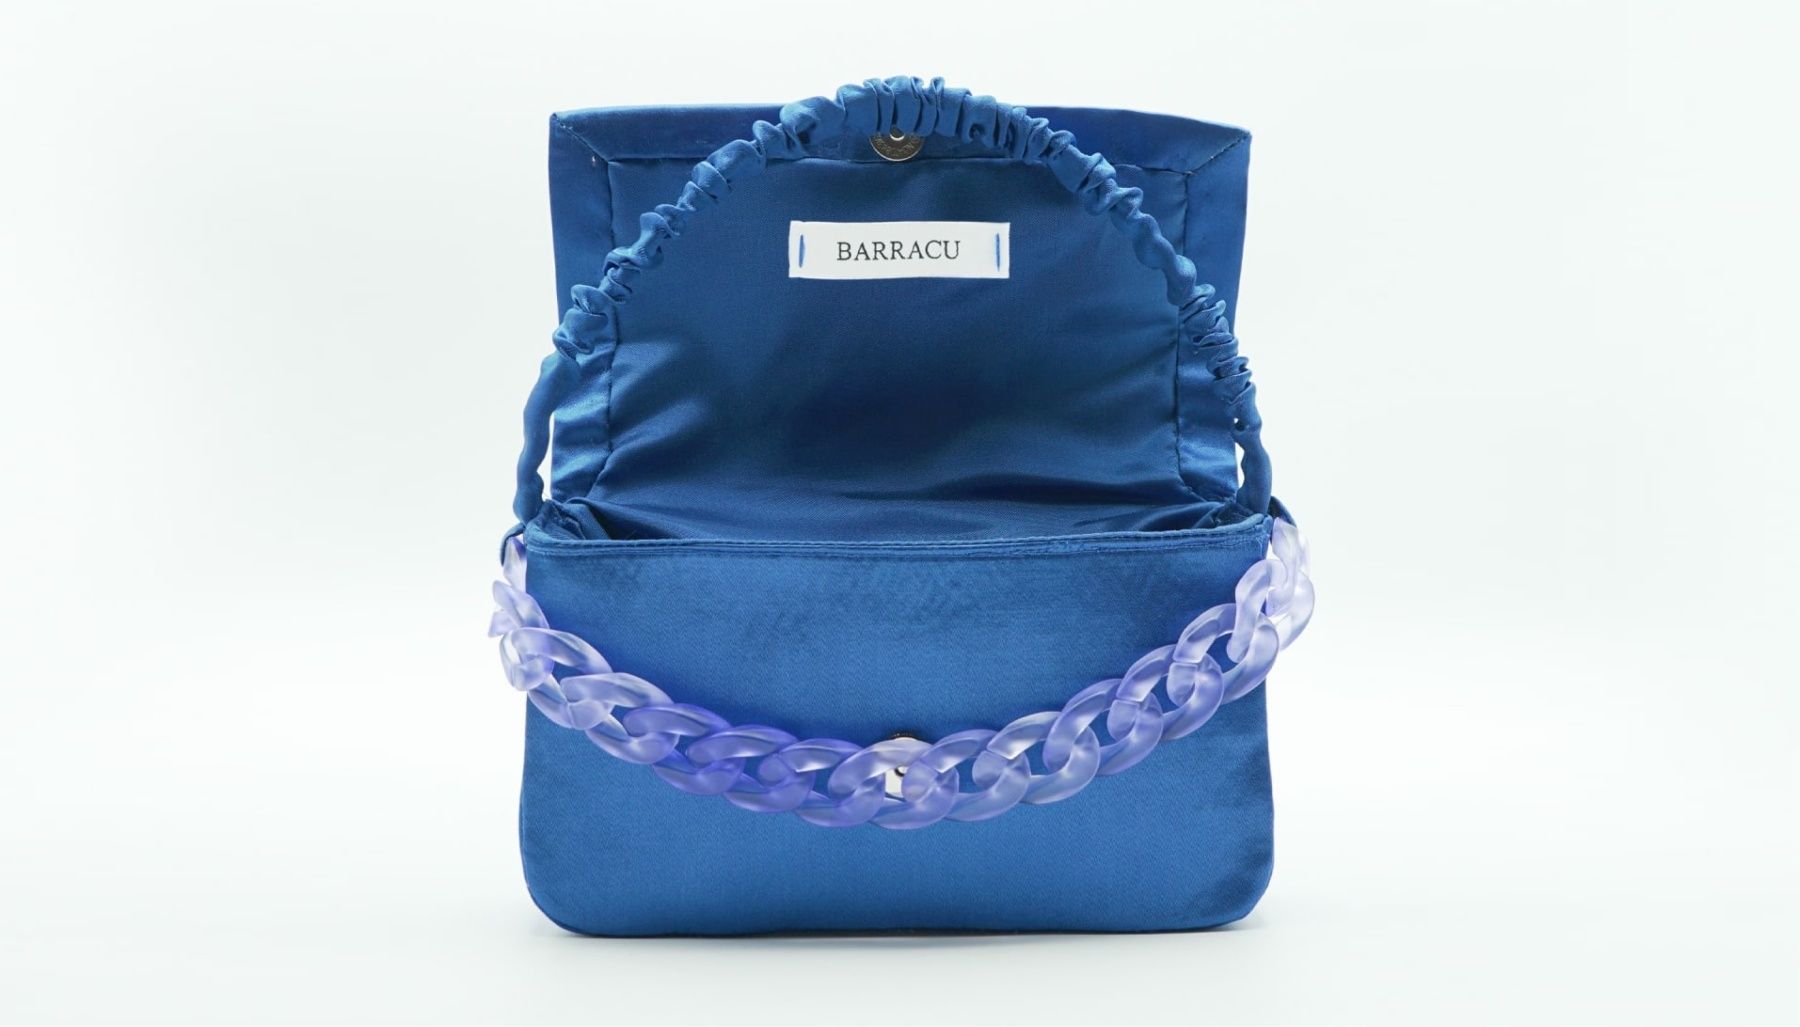 Atelier Barracu_Blue Electric Upcycling Bag